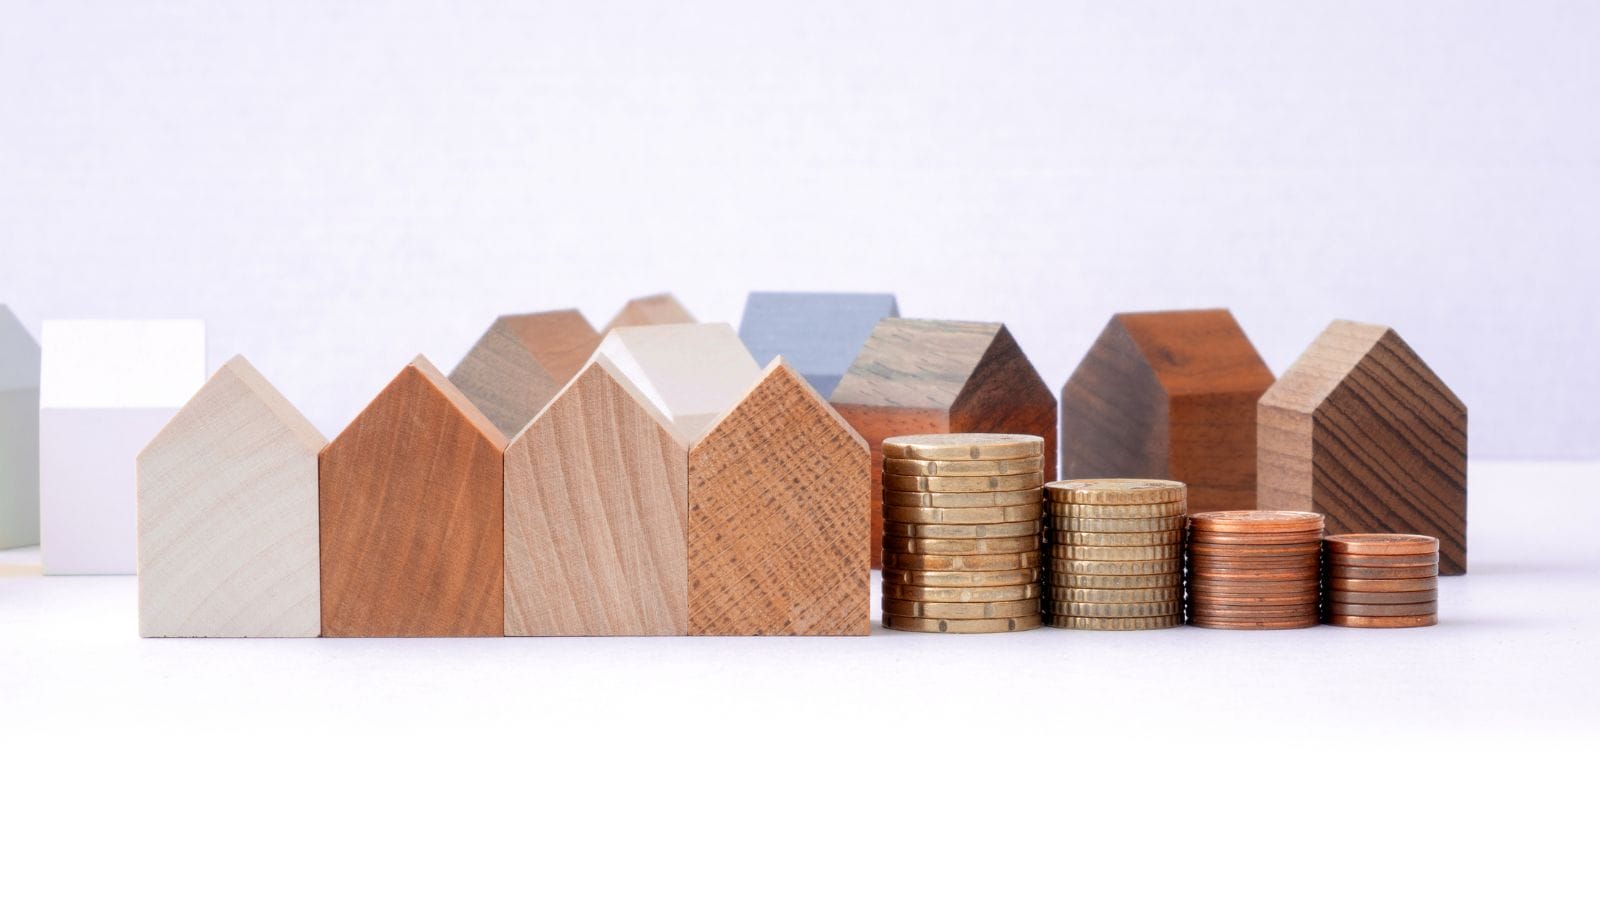 picture of wooden houses and money stacked up next to the houses